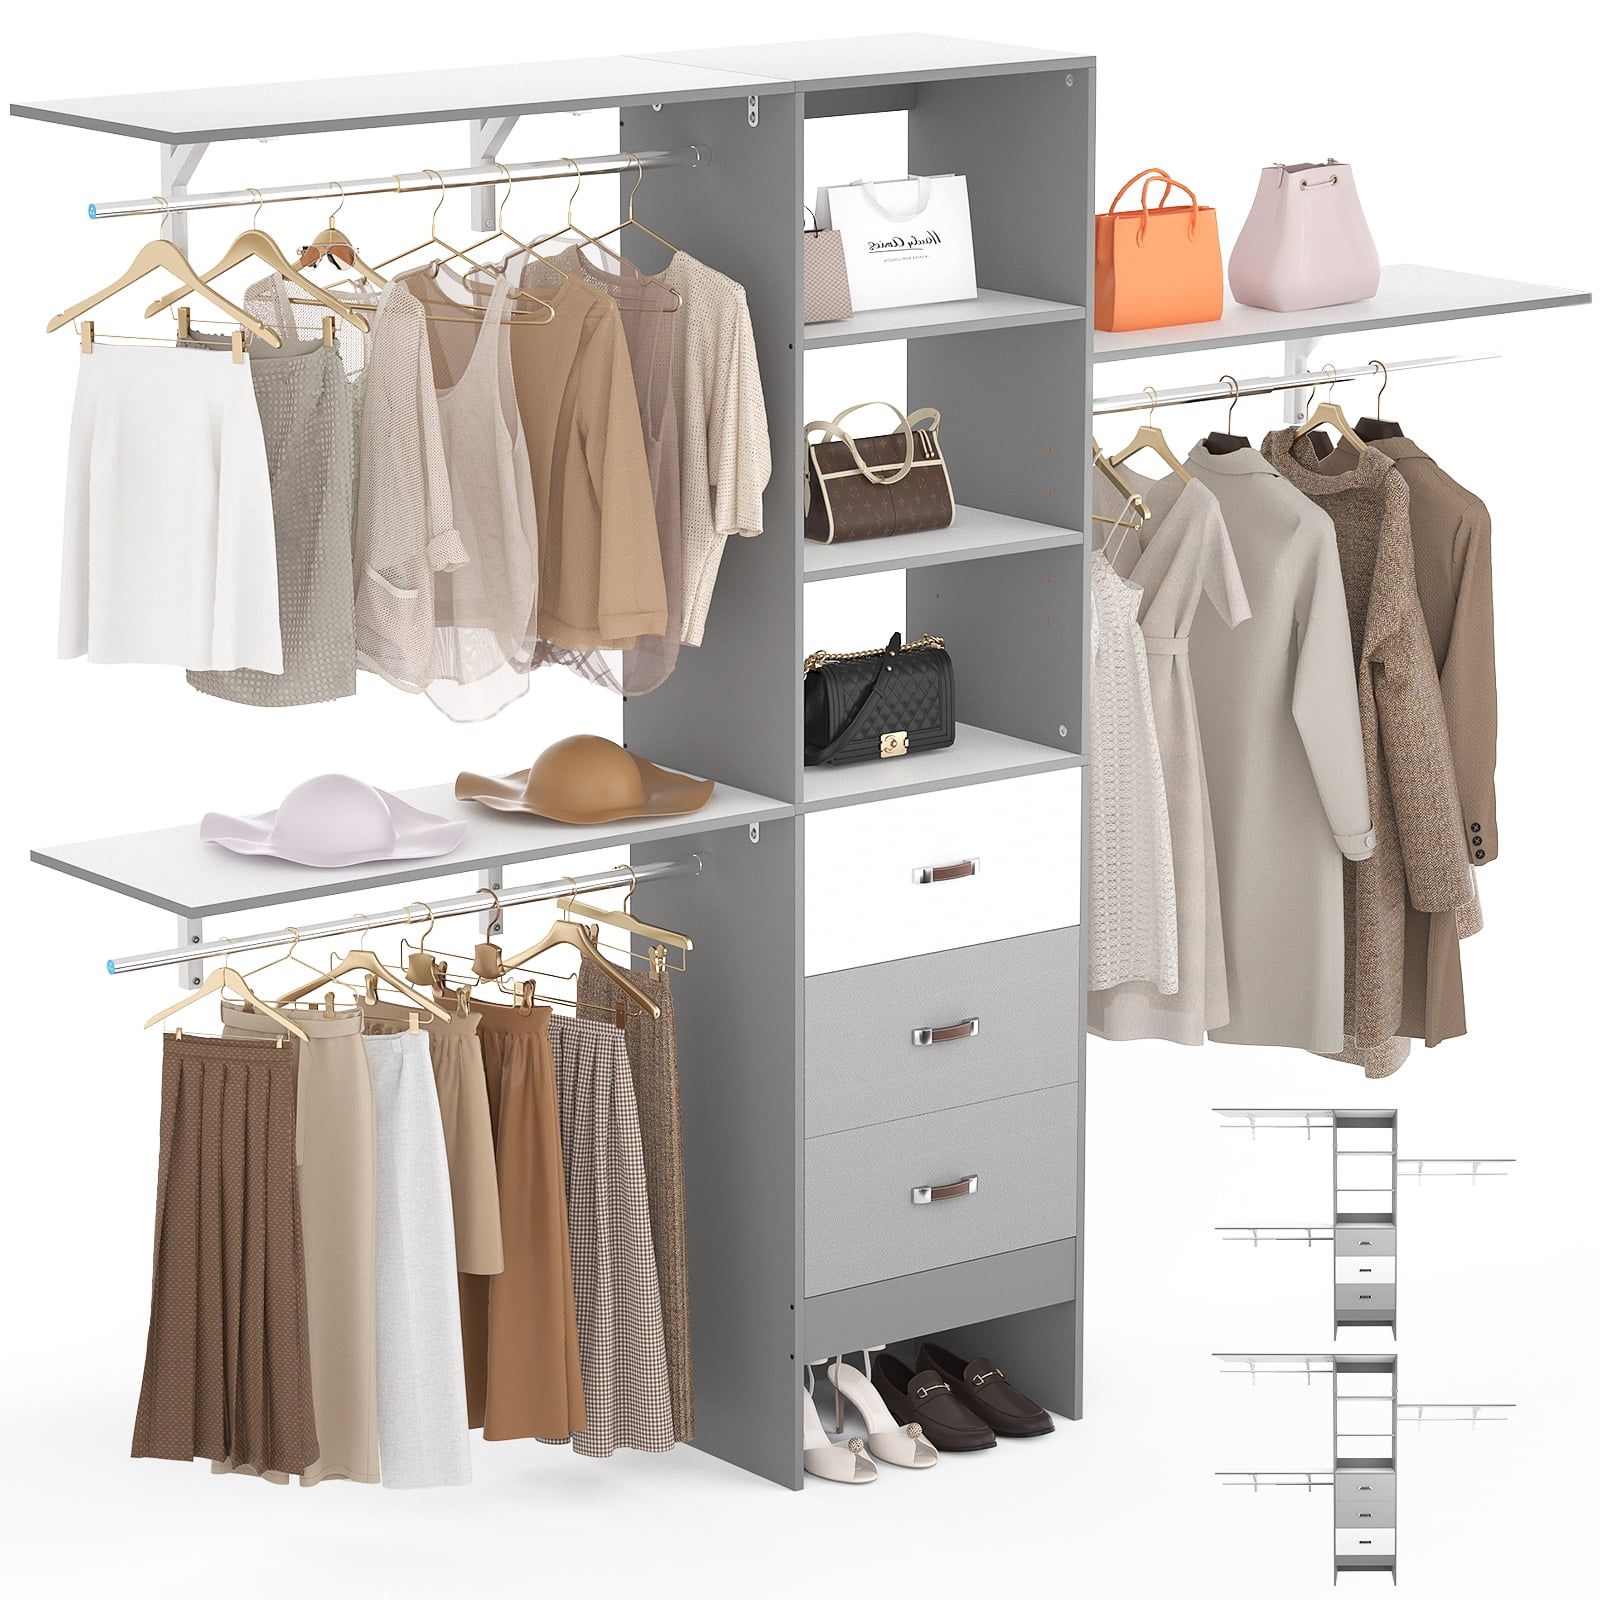 2018 96 Inches Wardrobes Inside Homieasy 96 Inches Closet System, 8ft Walk In Closet Organizer With 3  Shelving Towers, Heavy Duty Clothes Rack With 3 Drawers, Built In Garment  Rack, 96" L X 16" W X 75" H, (Photo 6 of 10)